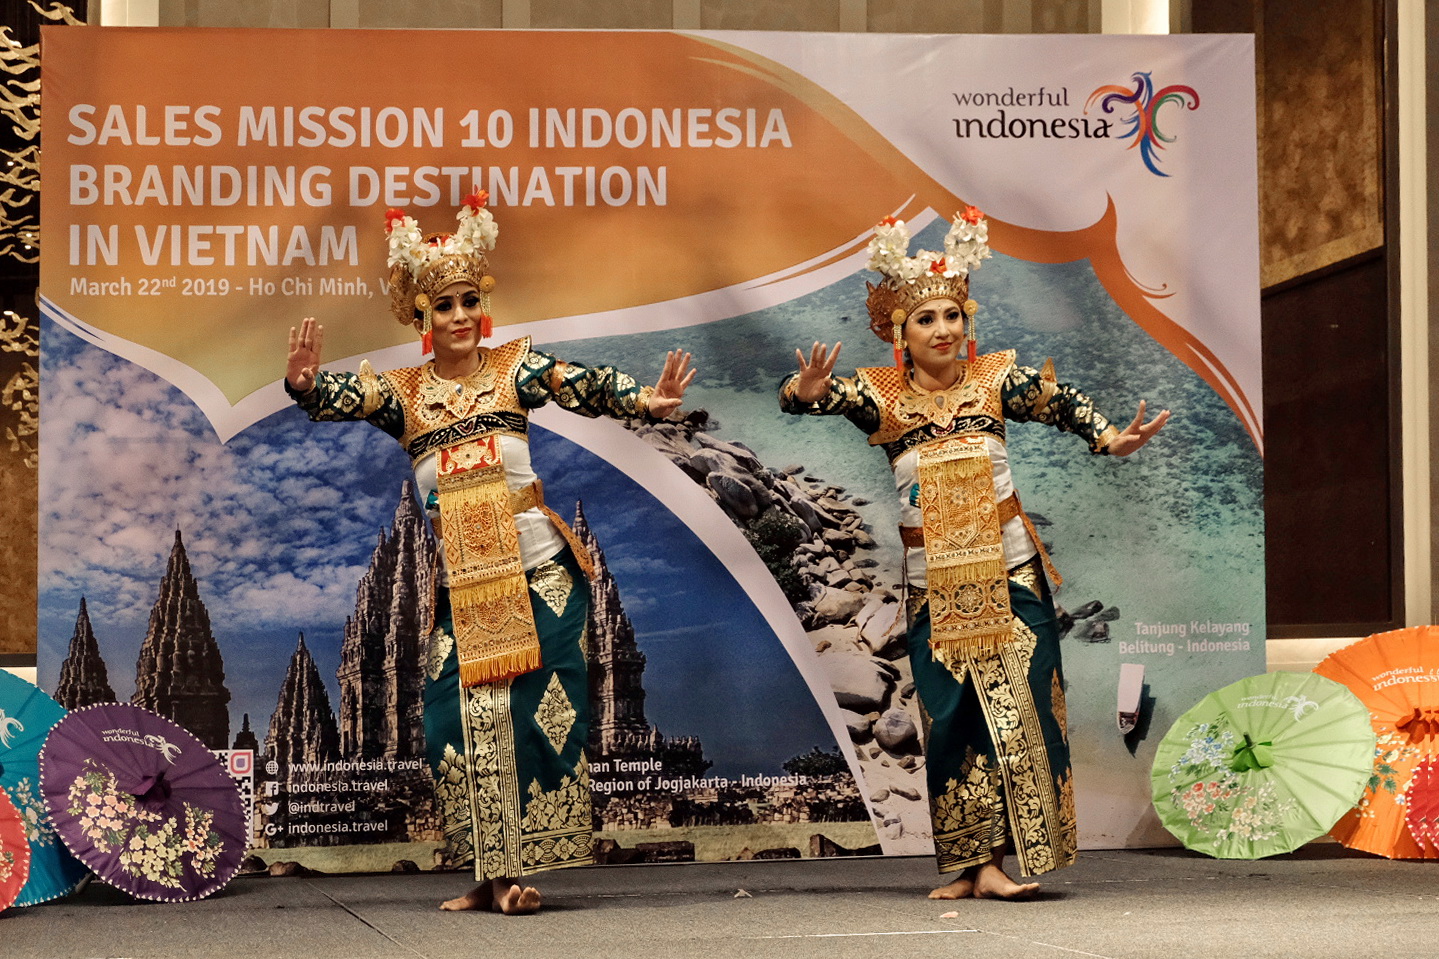 Indonesia targets 100,000 tourist arrivals from Vietnam in 2019